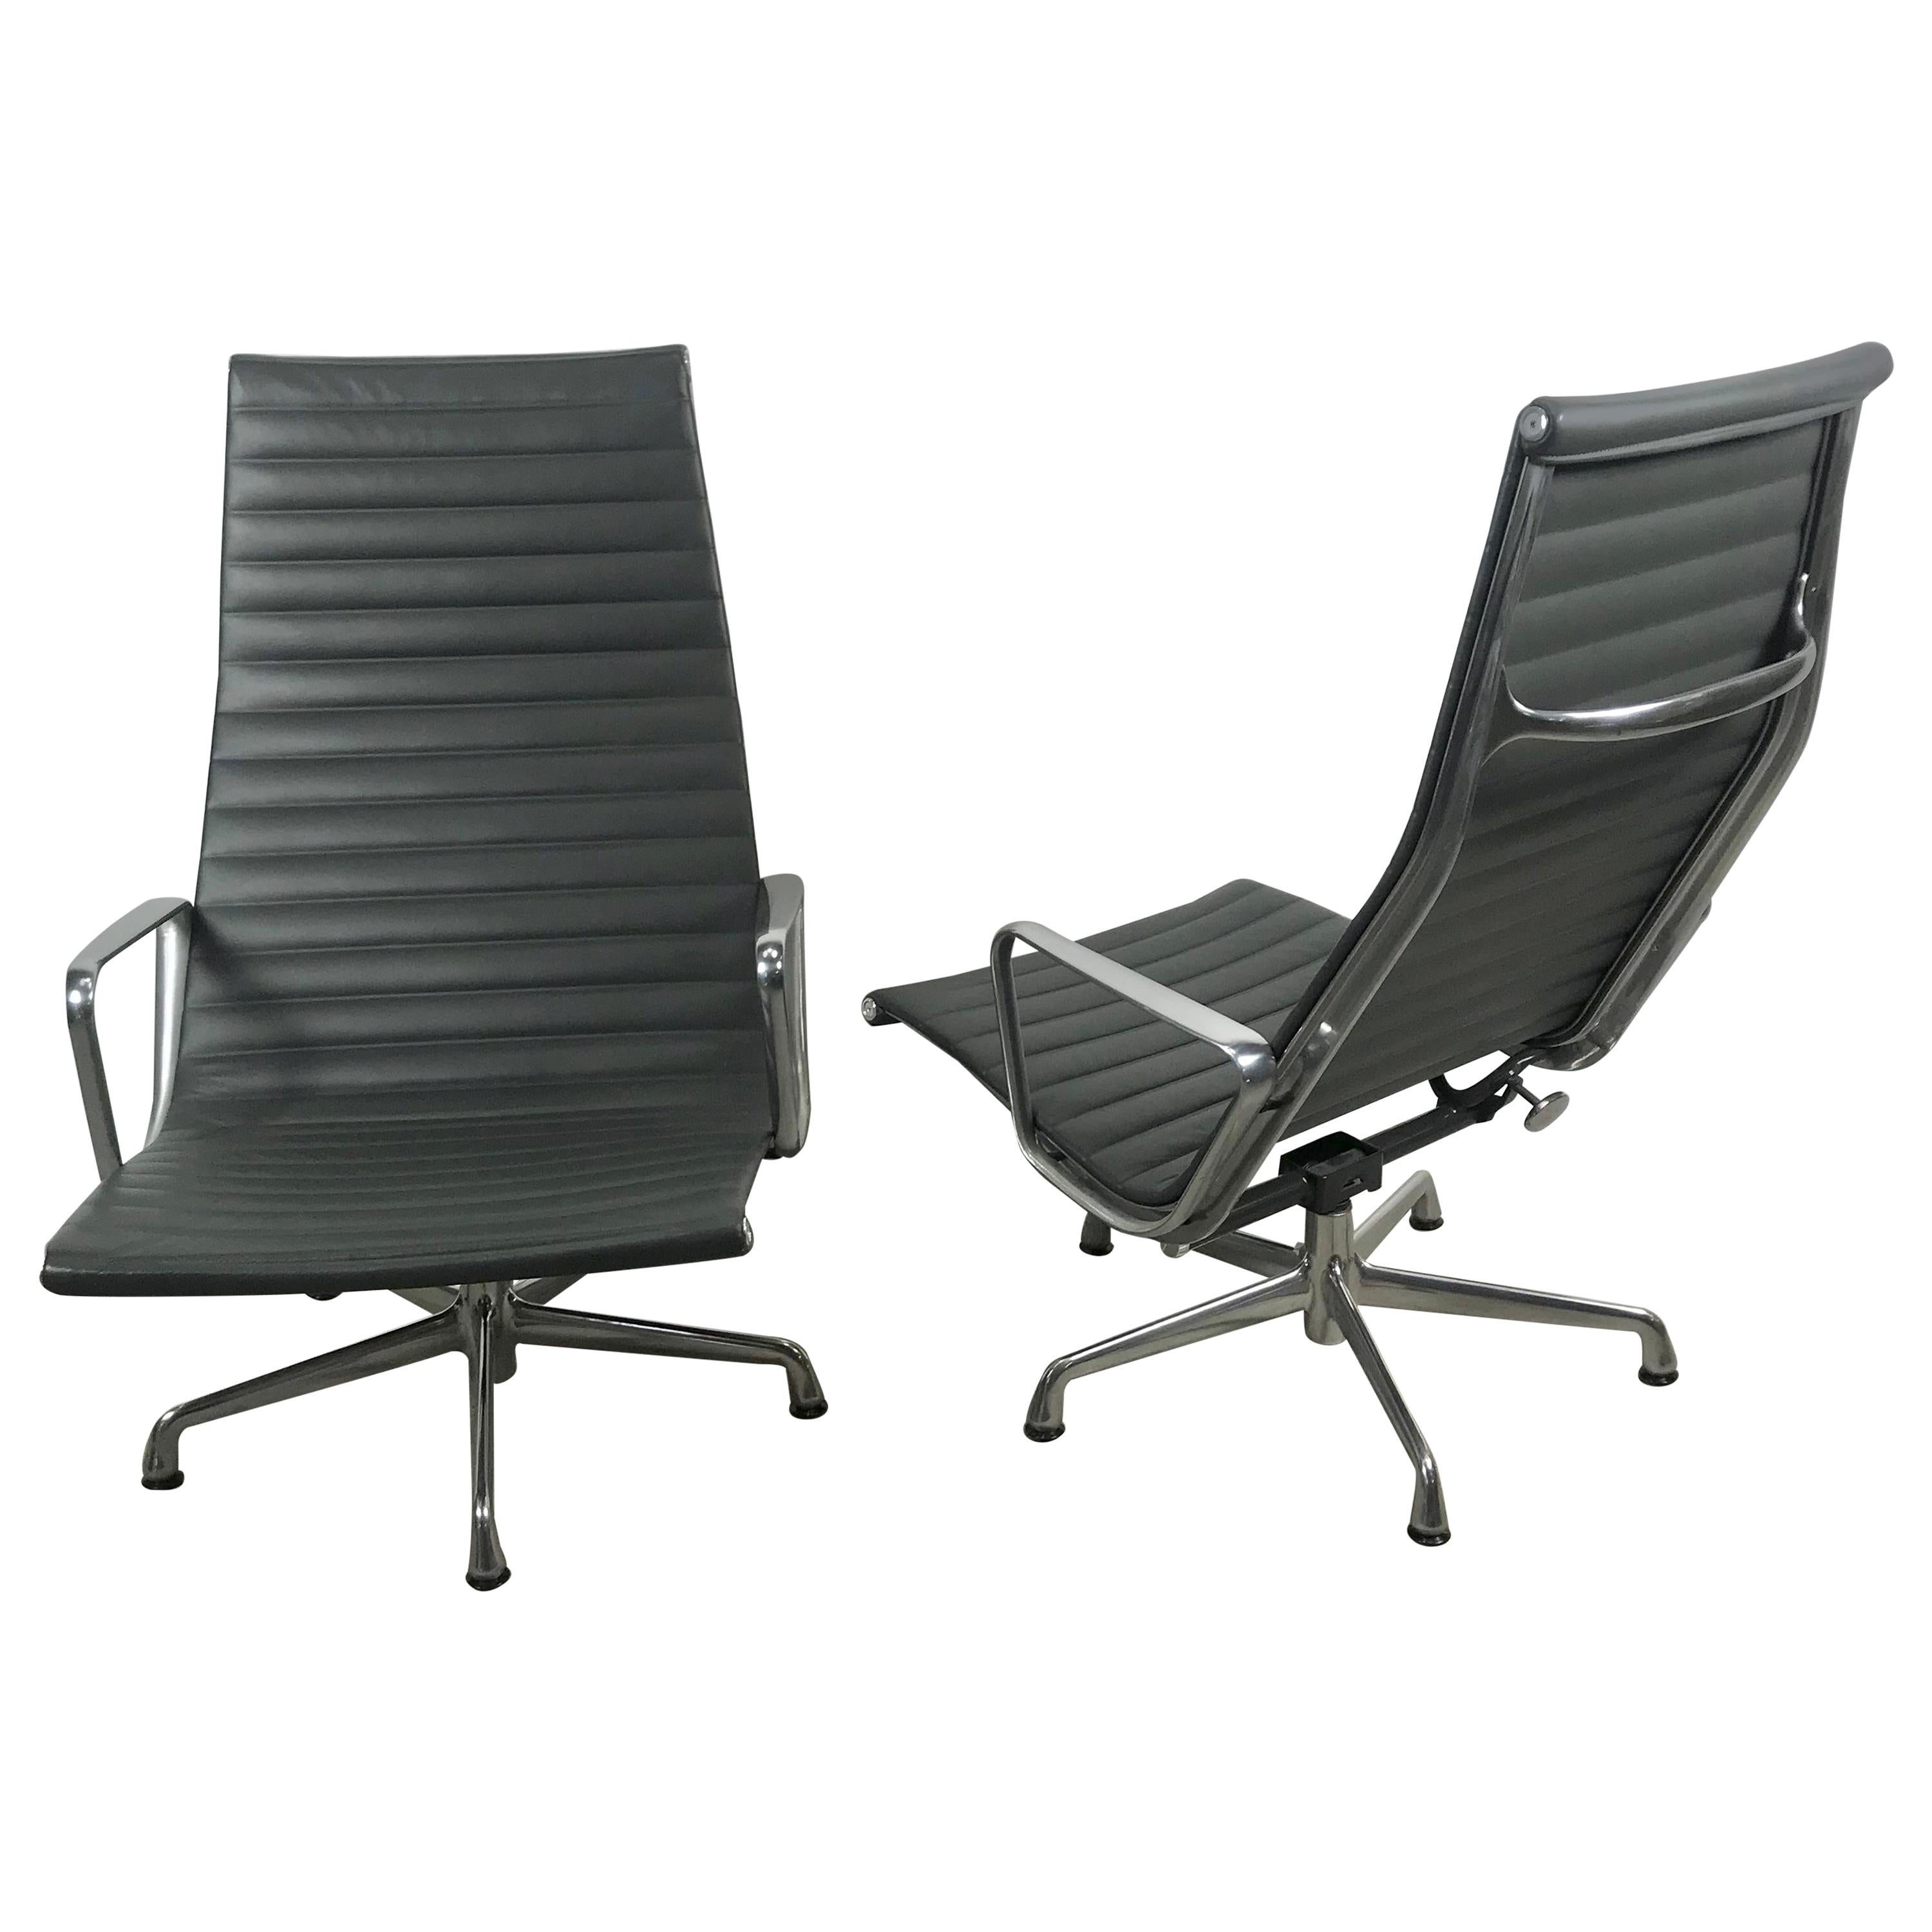 Aluminum Group Lounge Chairs by Charles Eames for Herman Miller, Custom Leather